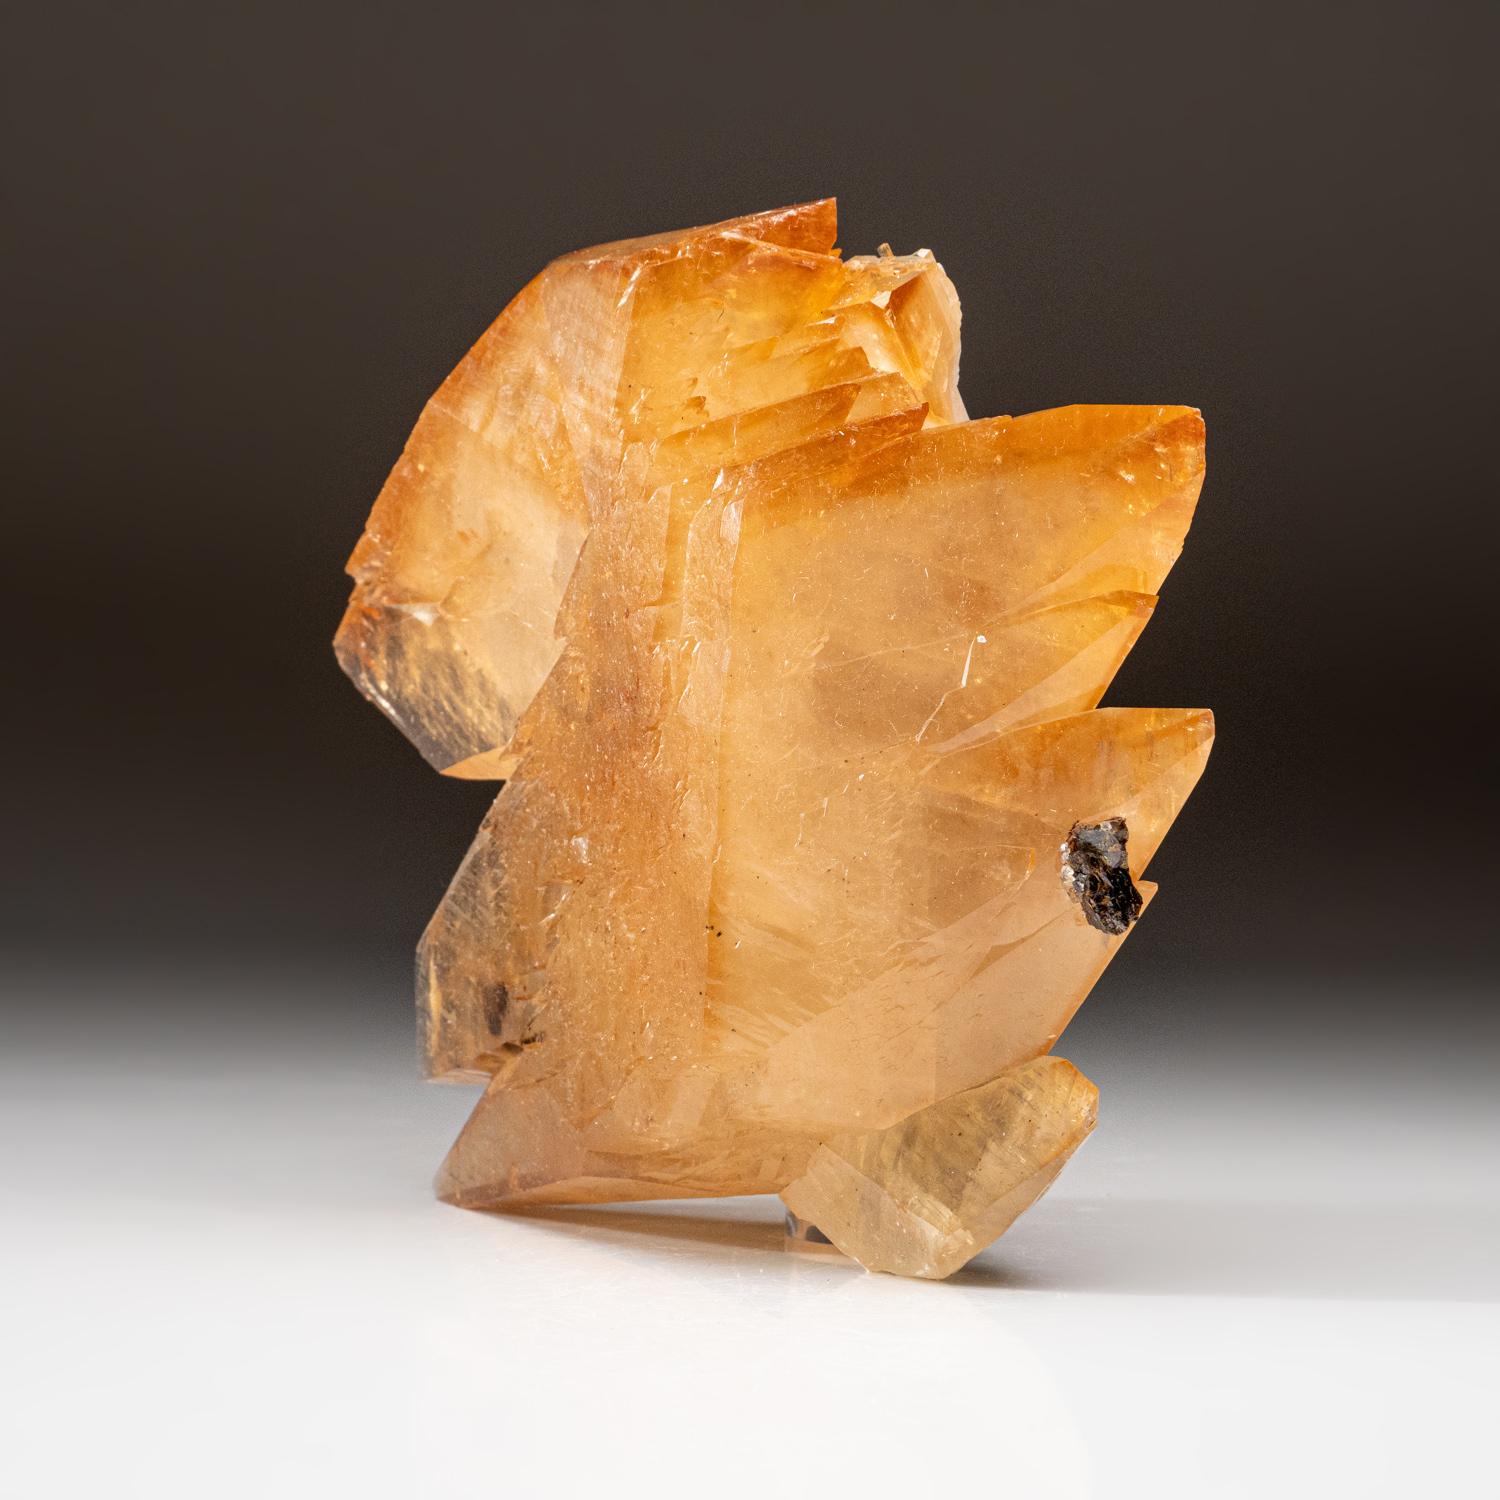 Lustrous transparent deep golden calcite crystal on matrix. Large double terminated scalenohedral twinned on the C-axis with well defined re-entrant faces. Small sphalerite crystal embedded on the back of the specimen.

 

3 lbs, 7.5 x 6.5 x 2.5